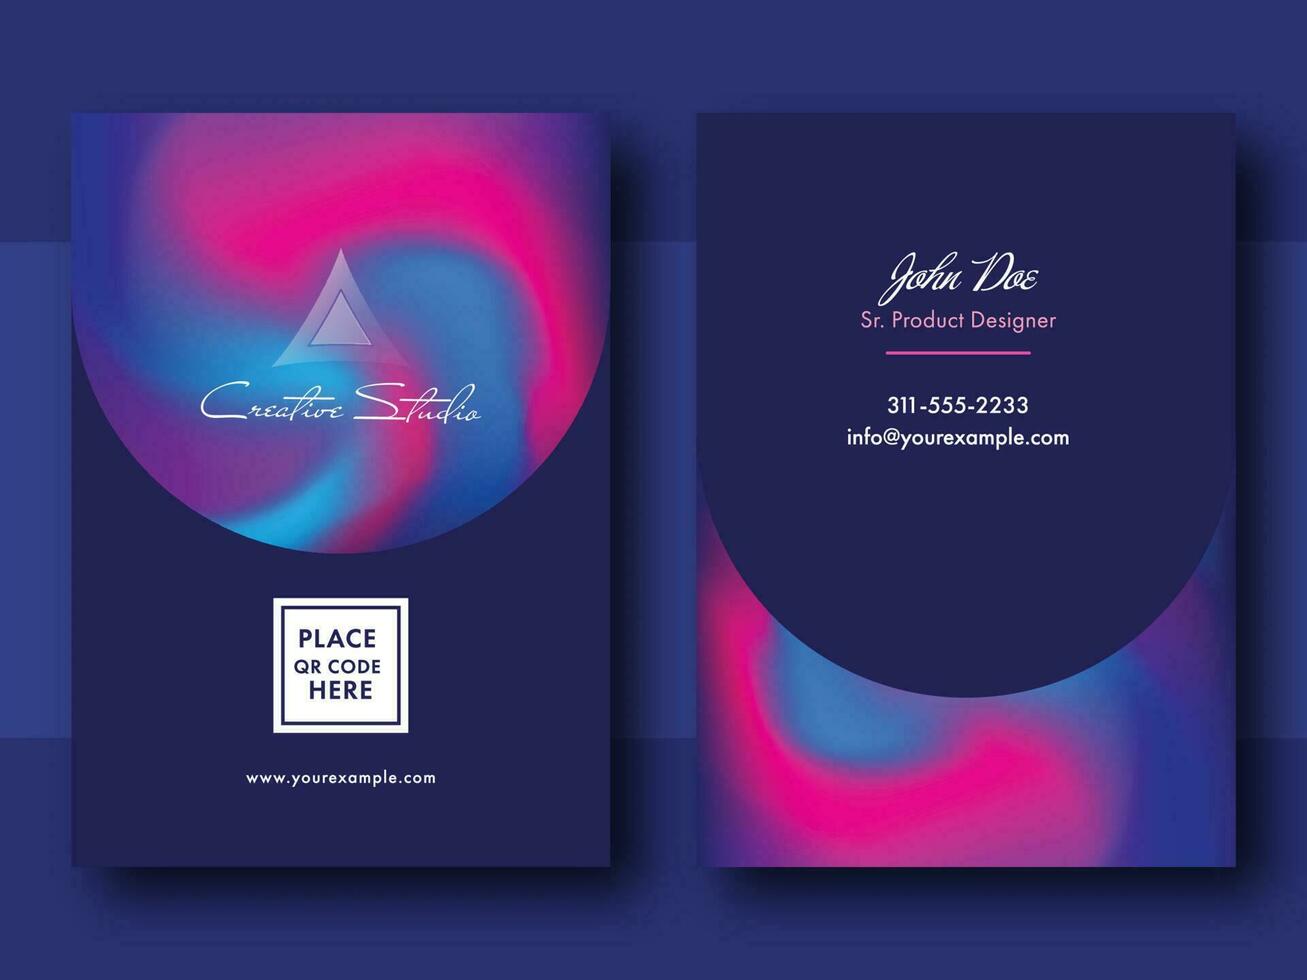 Vertical Business Or Visiting Card Design With Blurred Twirl Liquid In Front And Back Side. vector